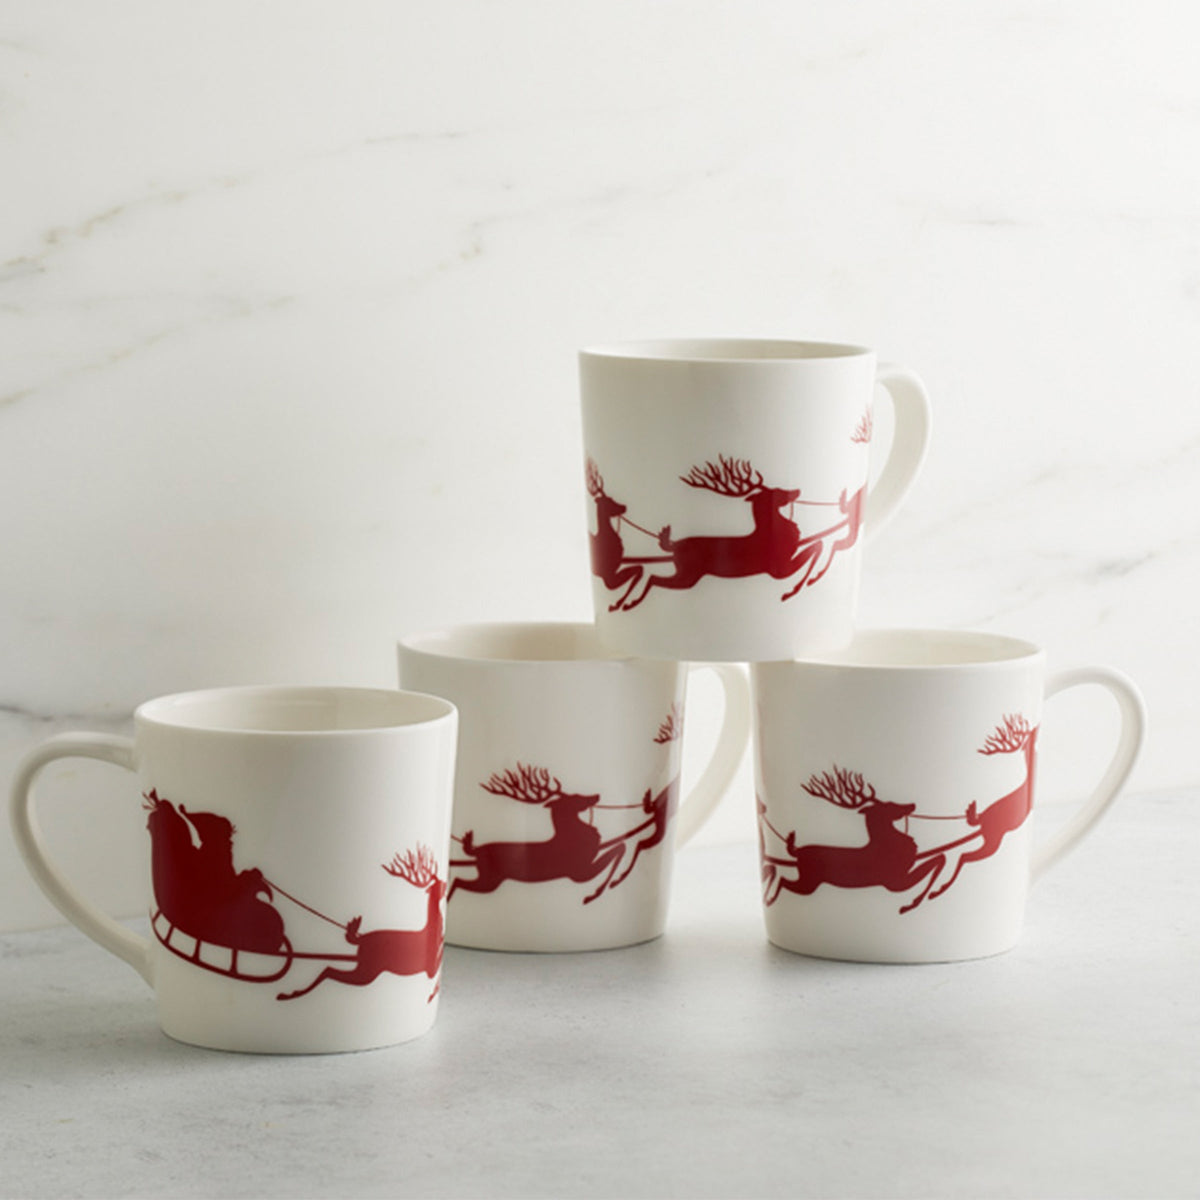 Four holiday-themed Sleigh Mugs with red reindeer on them from Caskata Artisanal Home.